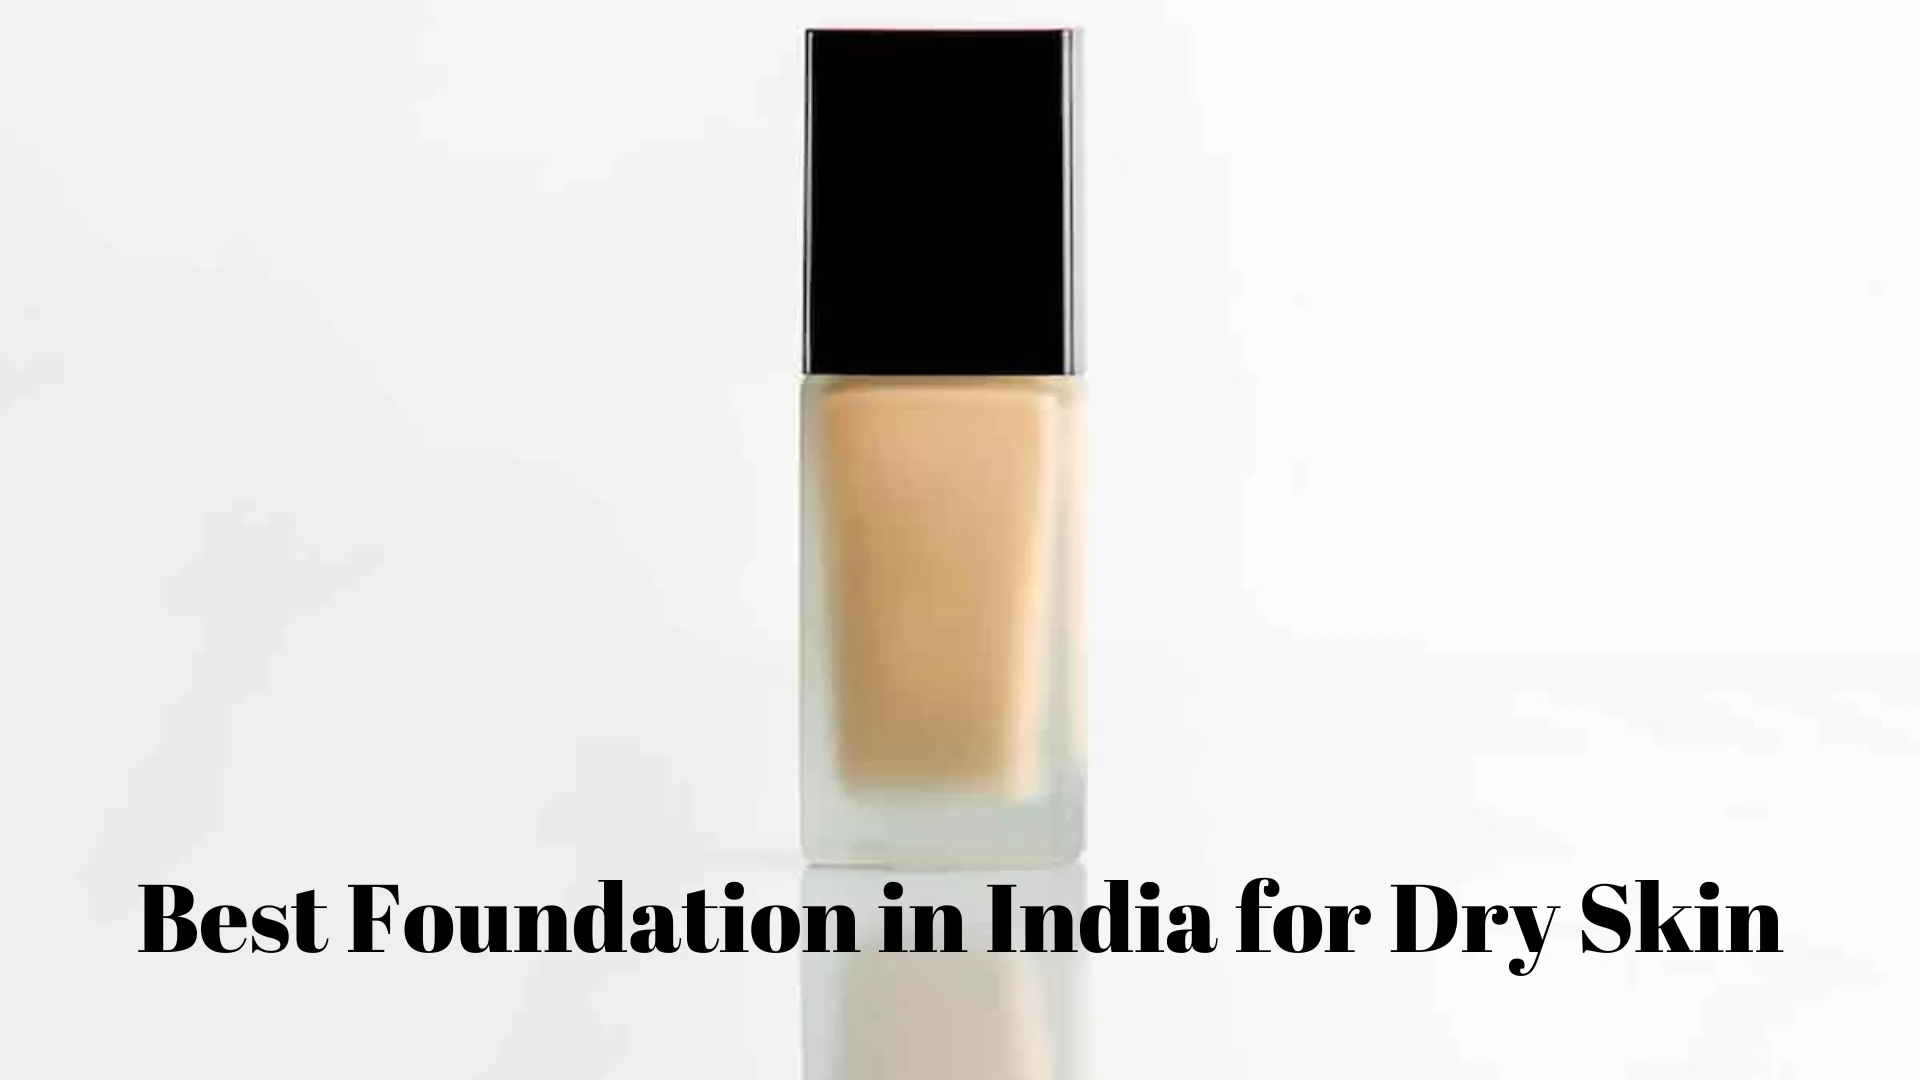 Best Foundation in India for Dry Skin